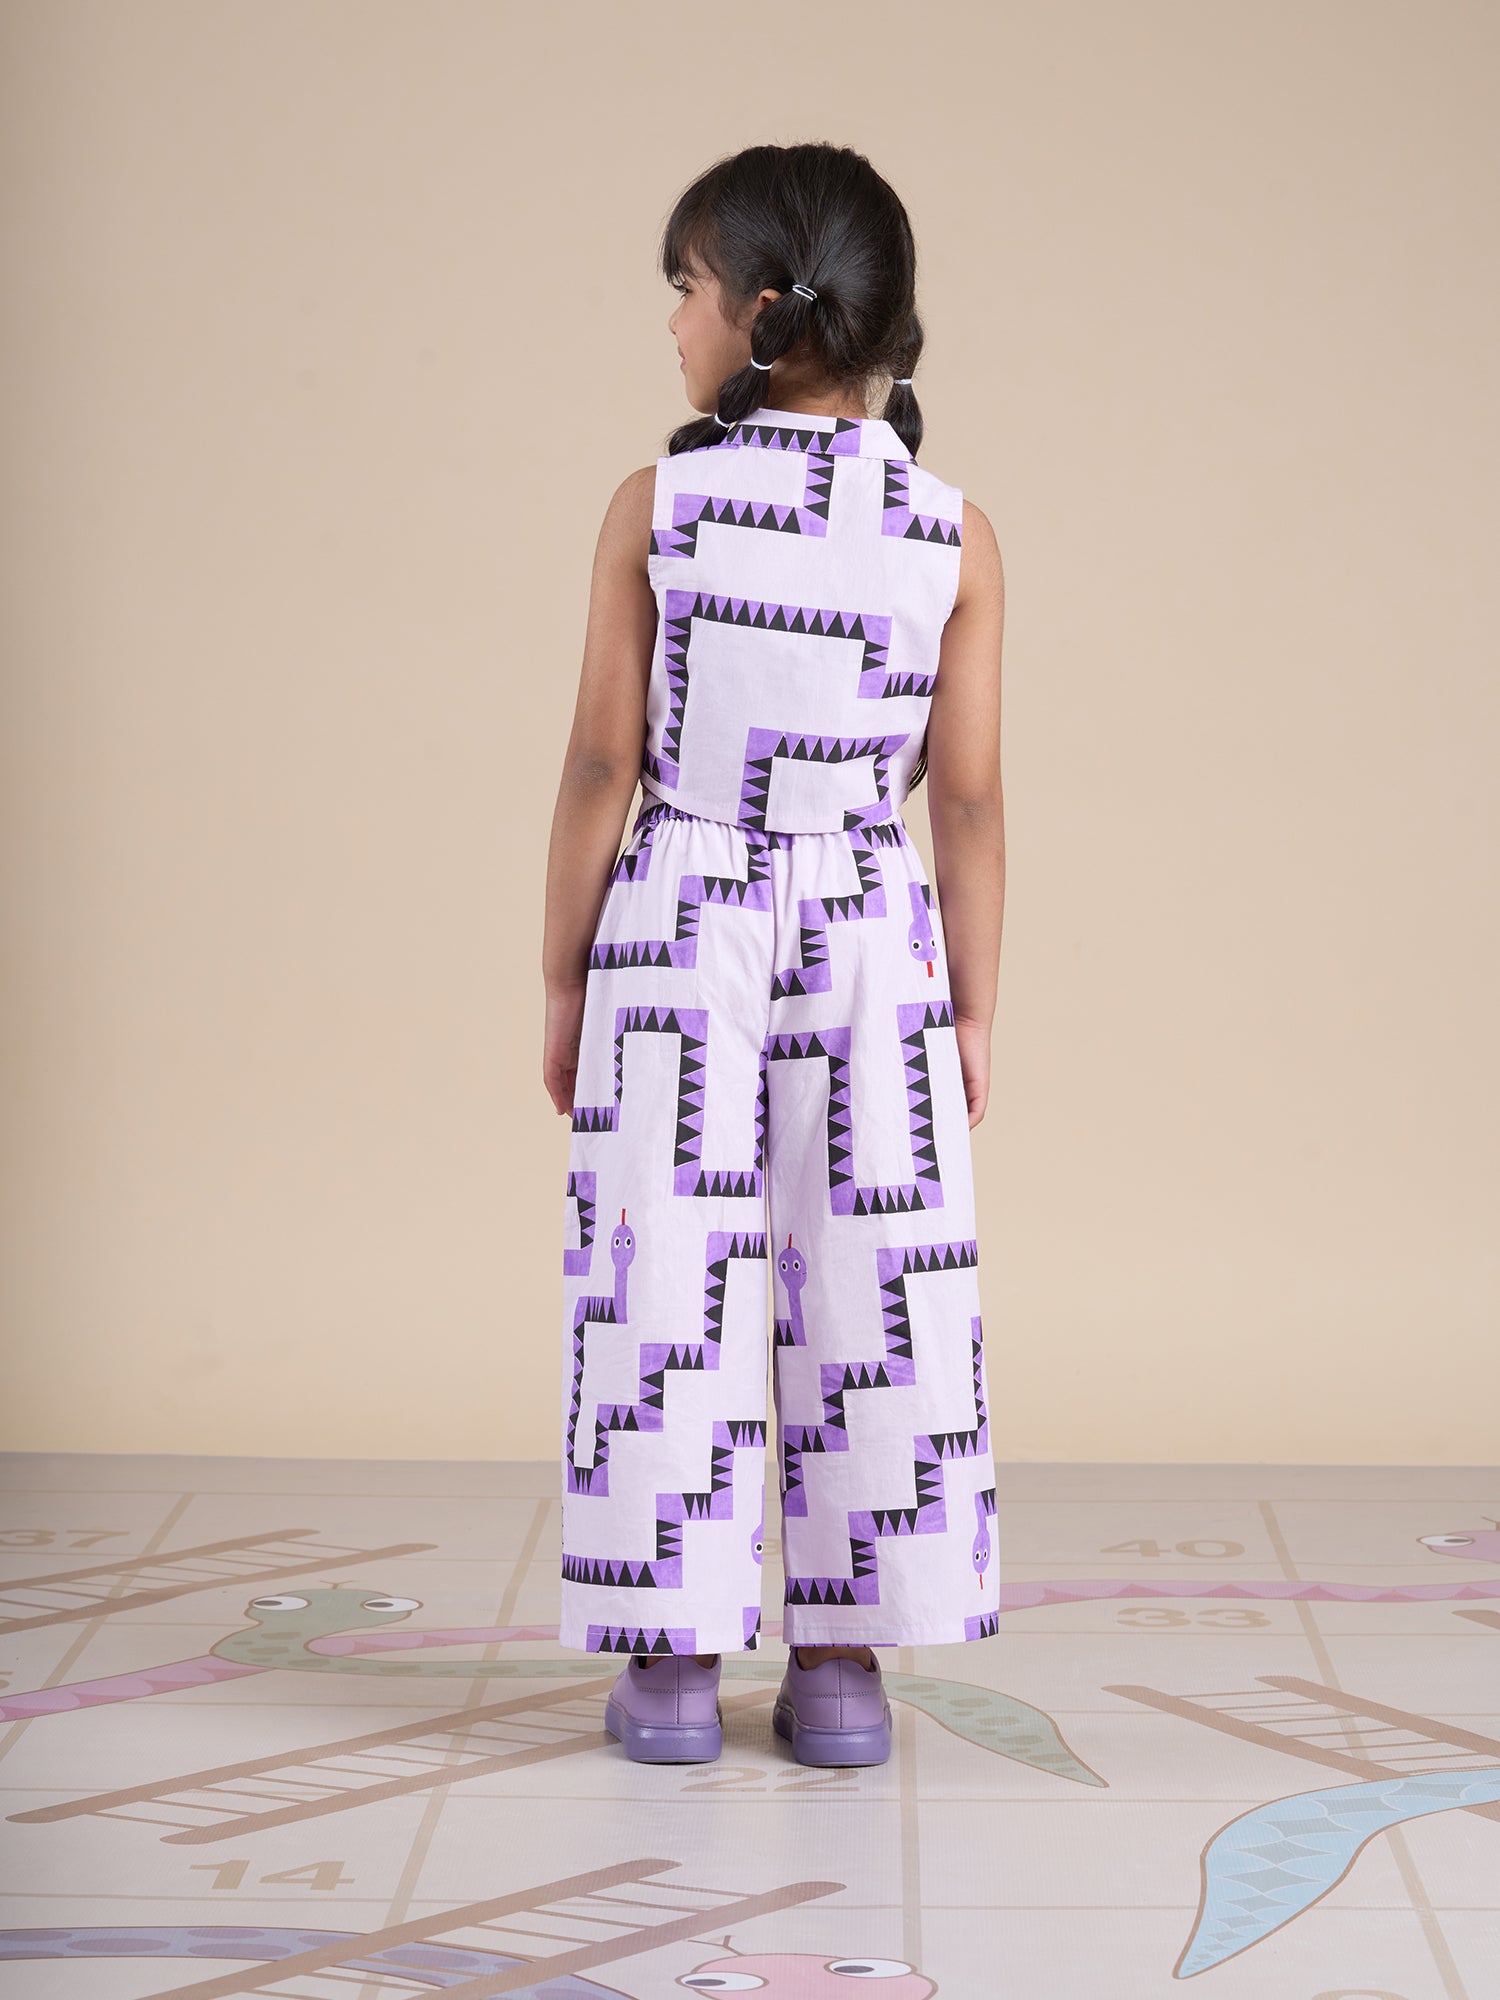 Snakes And Ladders Girls Purple Table Print Top And Pant Set From Siblings Collection - Lil Drama